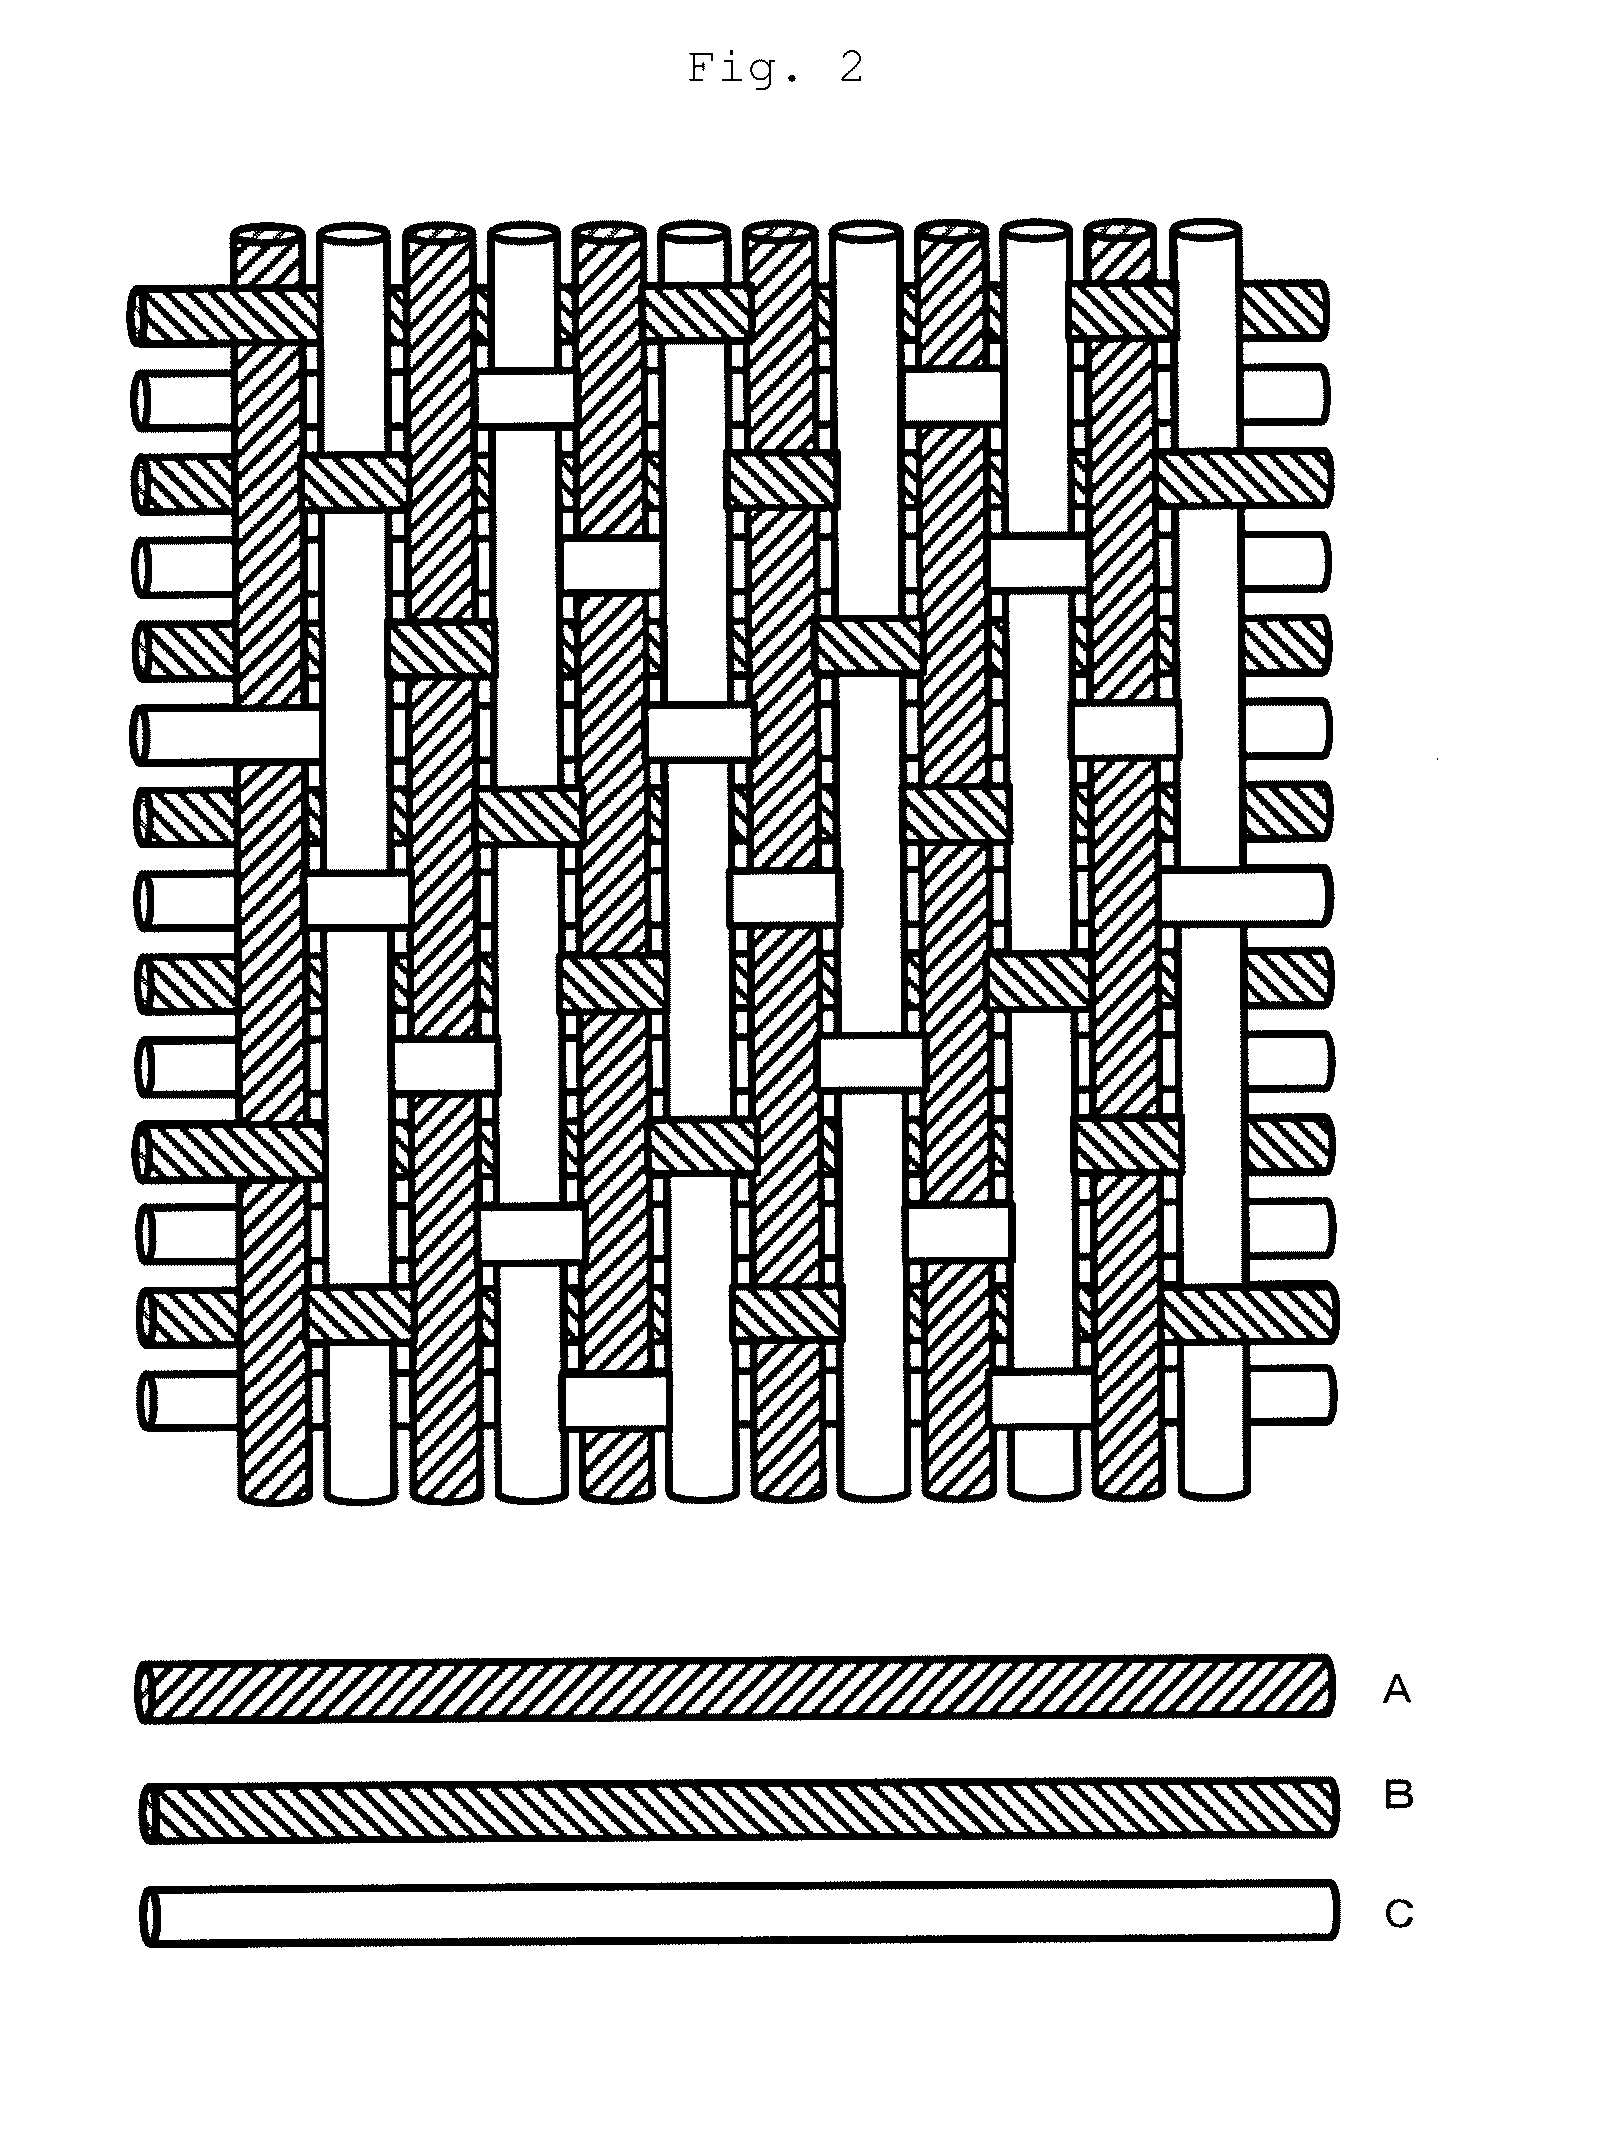 Transducer including fibers and outputting and inputting an electric signal